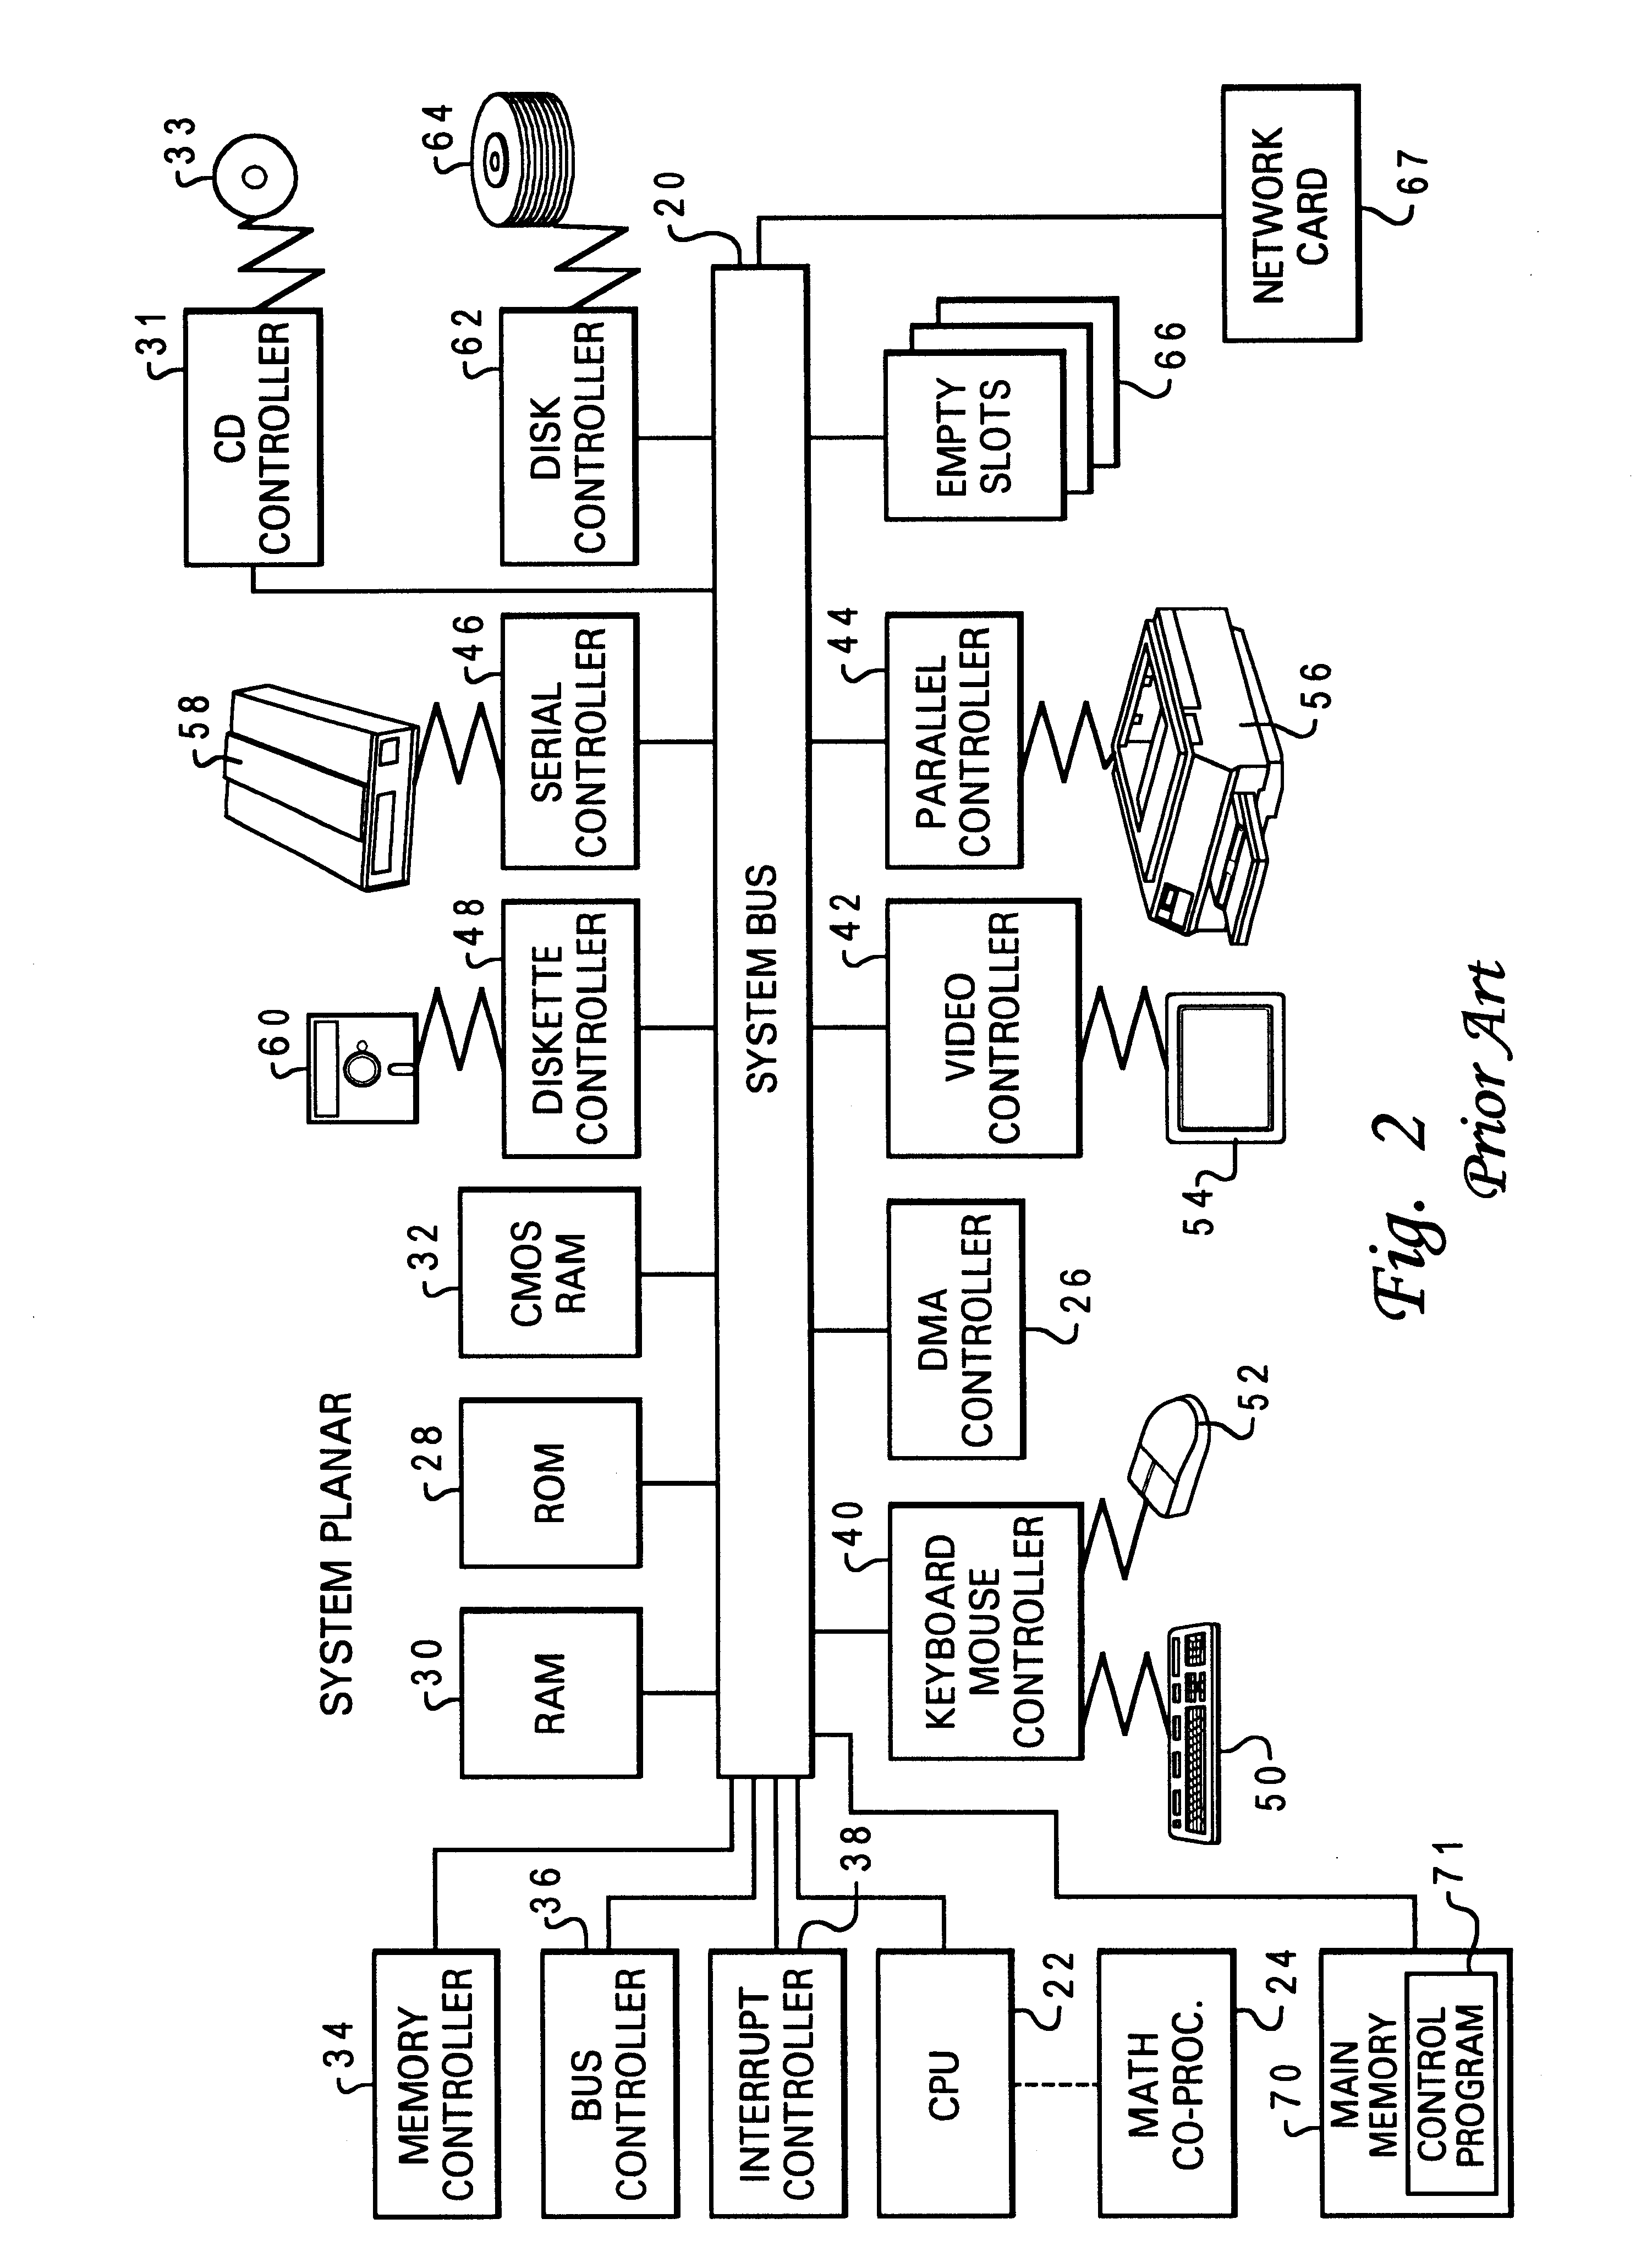 Method and system for the international support of internet web pages